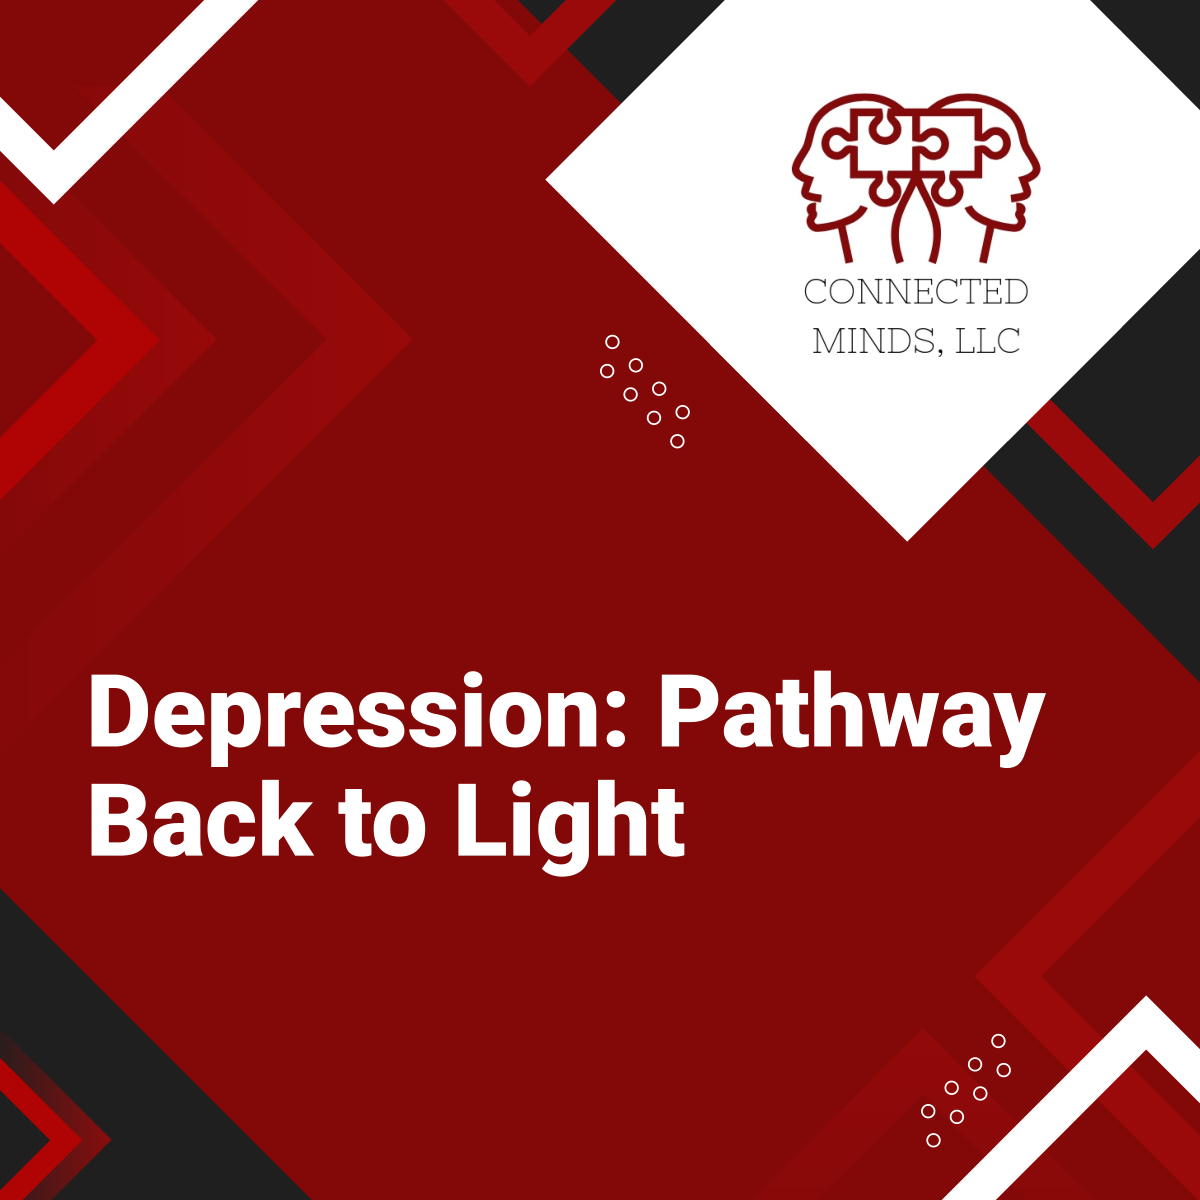 Living with depression often feels like navigating through an endless tunnel. But with the right resources and support, the light isn't far away. Discover coping mechanisms, expert advice, and stories of hope.

#PsychiatricWellness #CopingMechanisms #ExpertAdvice